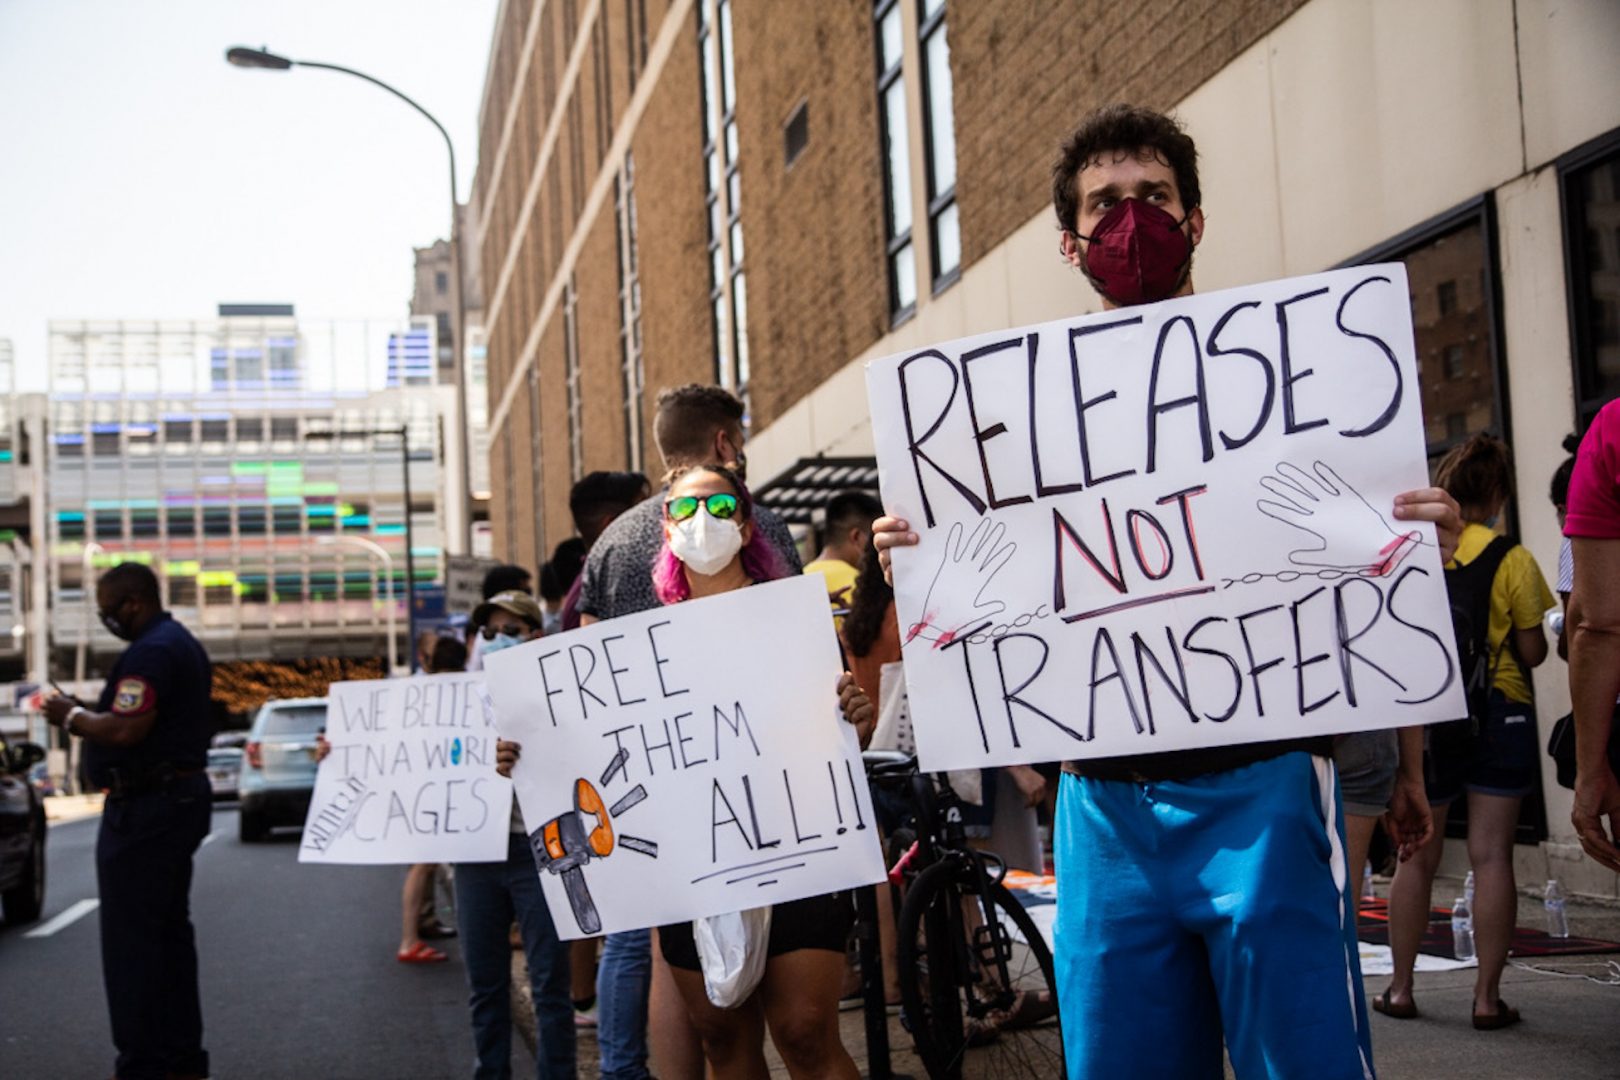 Members of immigrant advocate organizations rallied outside the ICE detention center in Philadelphia, demanding the release of detainees on Aug. 12, 2021.